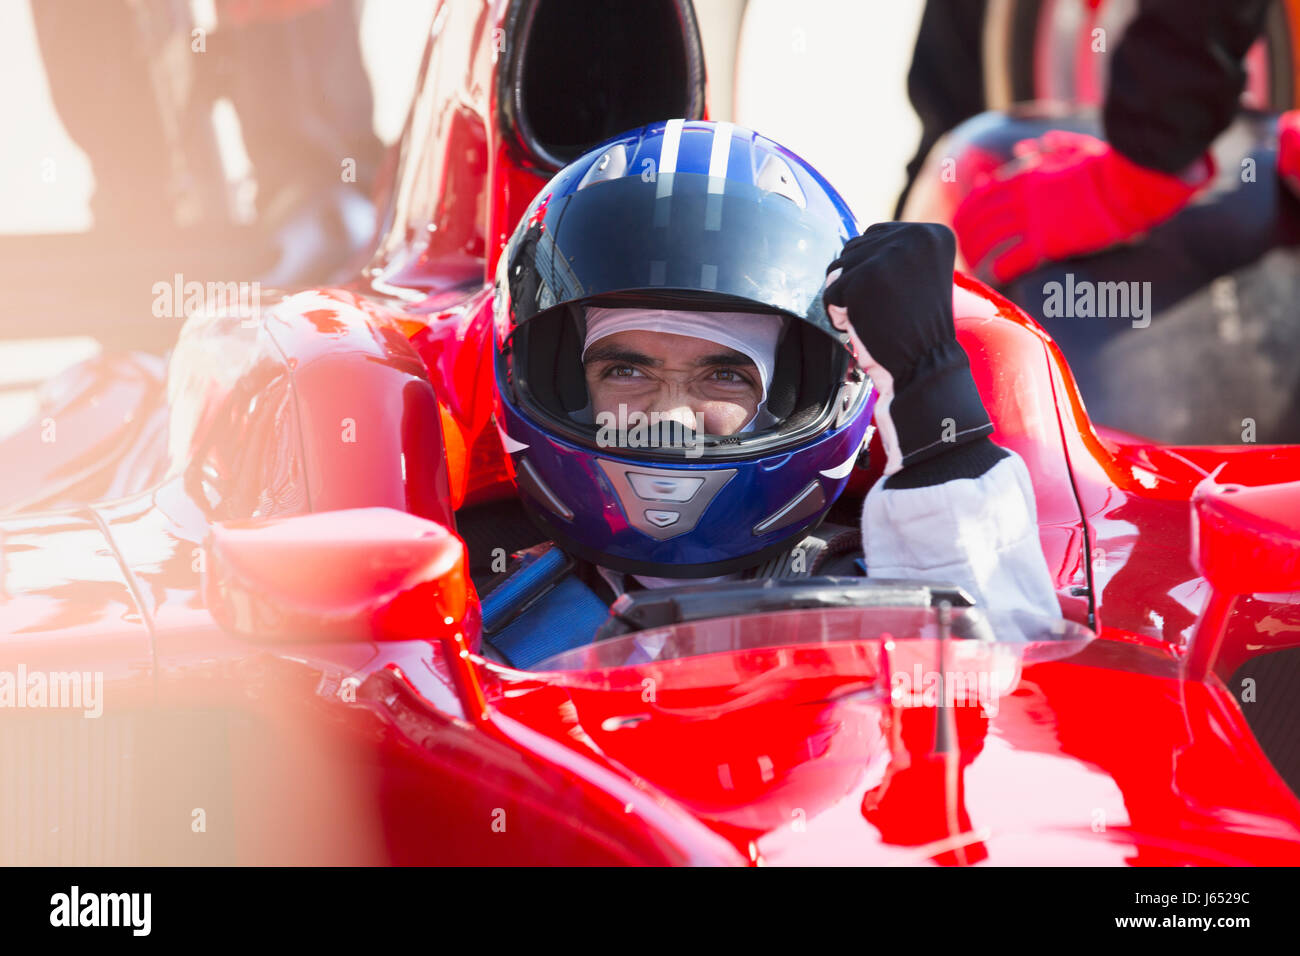 Formula one race car driver in helmet gesturing, celebrating victory Stock Photo